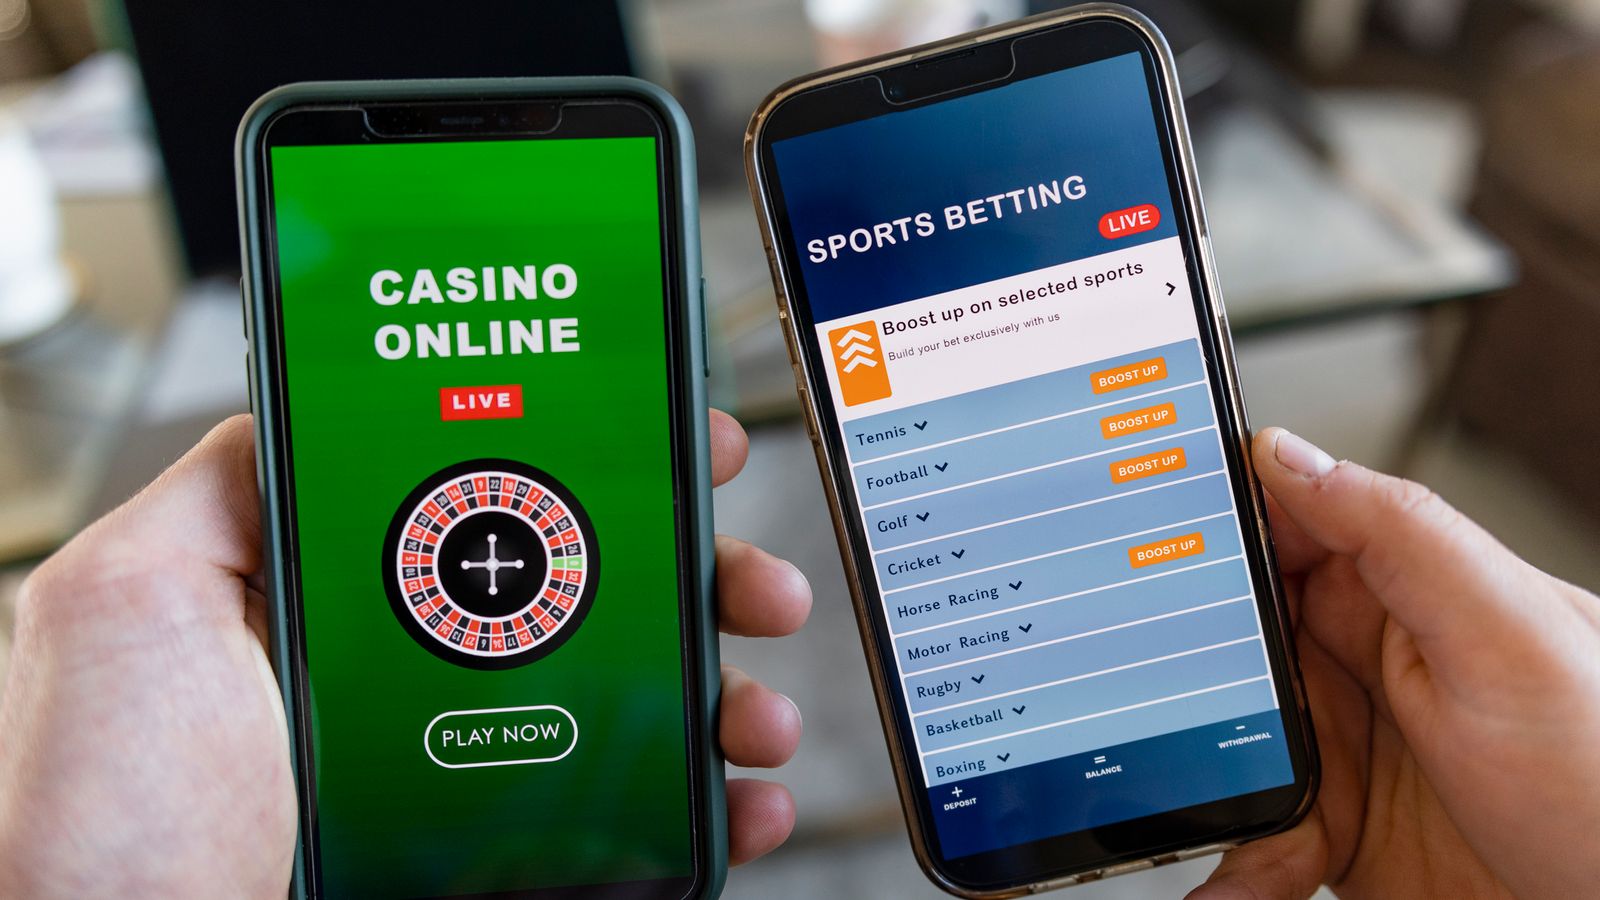 Tougher gambling laws needed as addict safeguards are failing, campaigners warn